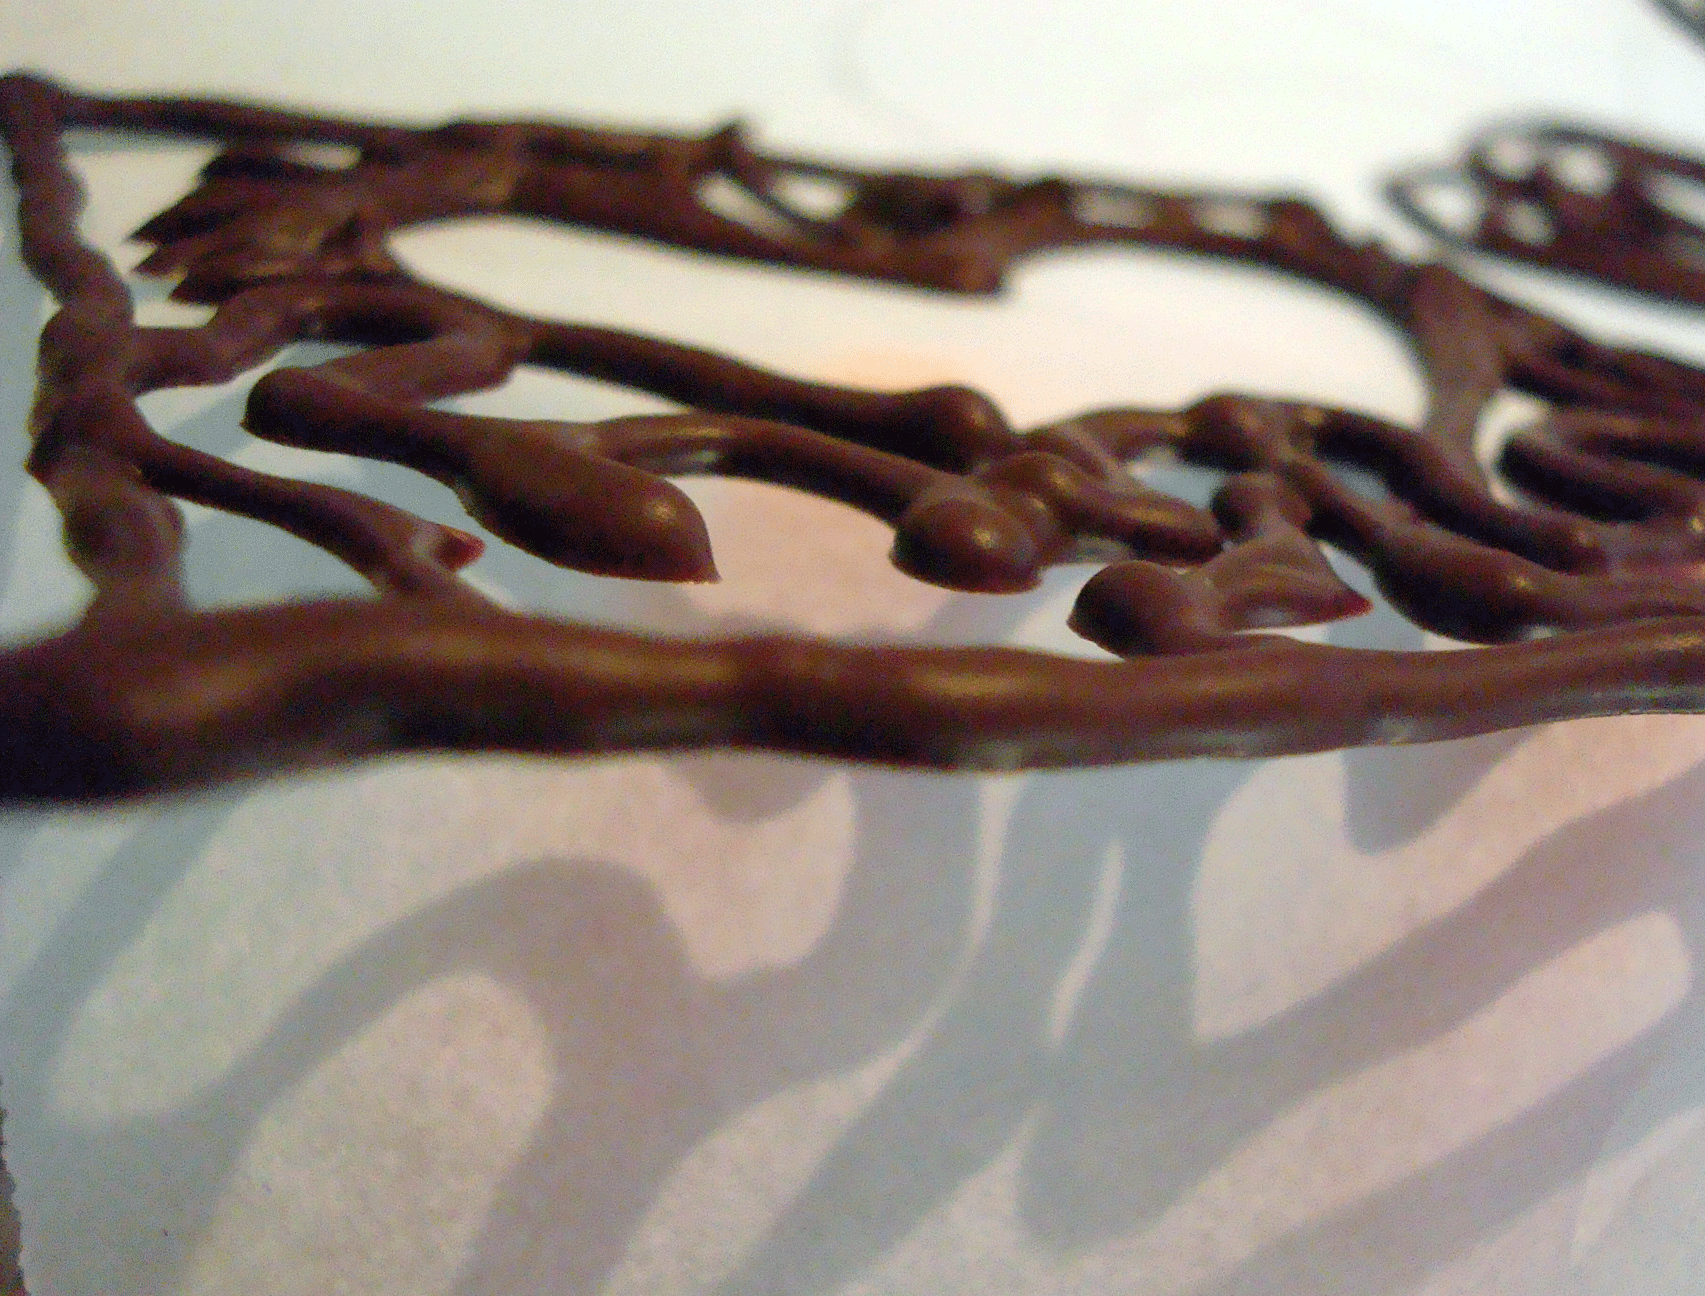 Cooling Chocolate on Paper